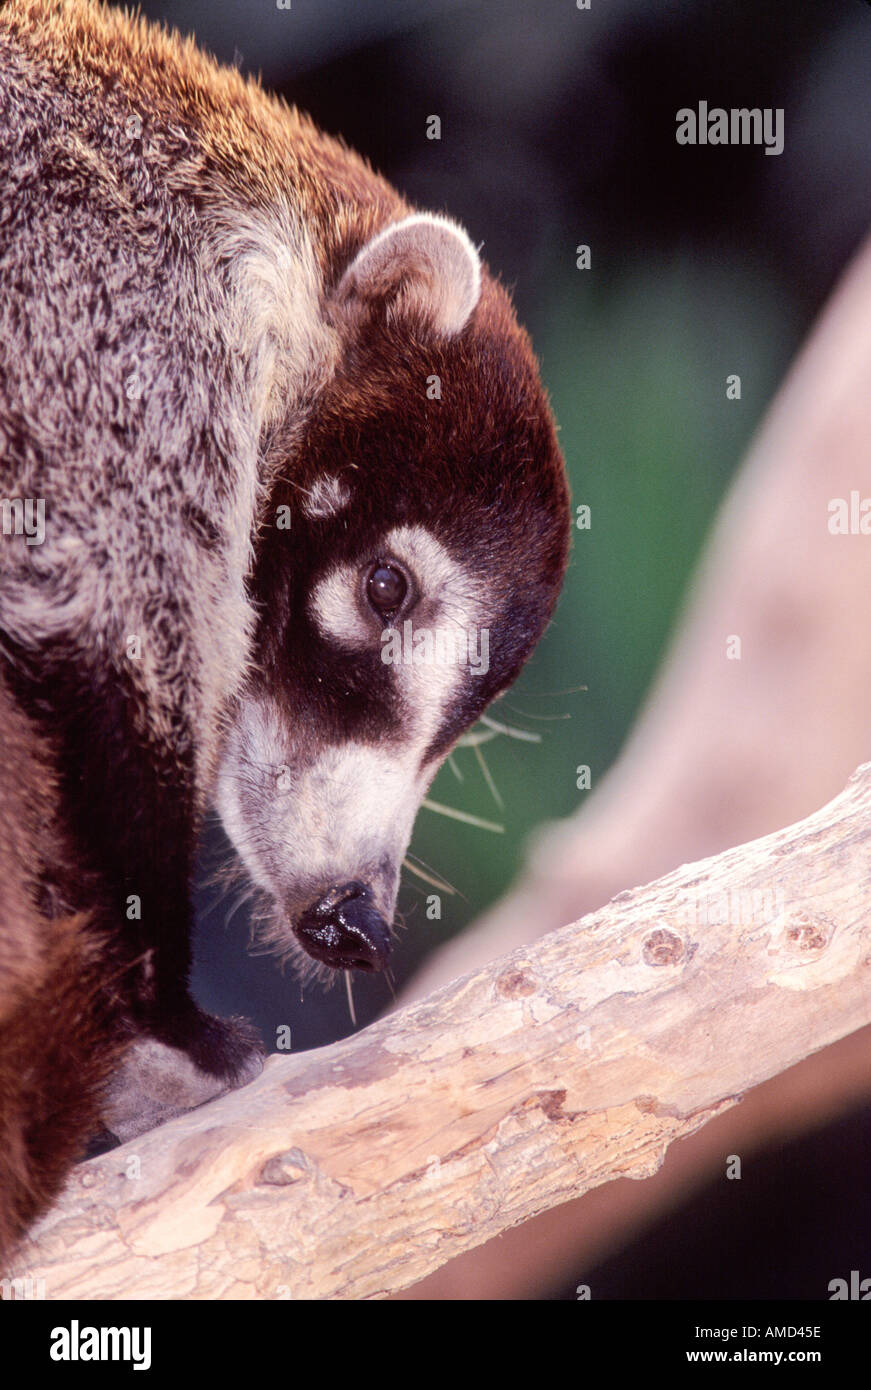 White Nosed Coati Banque D'Images